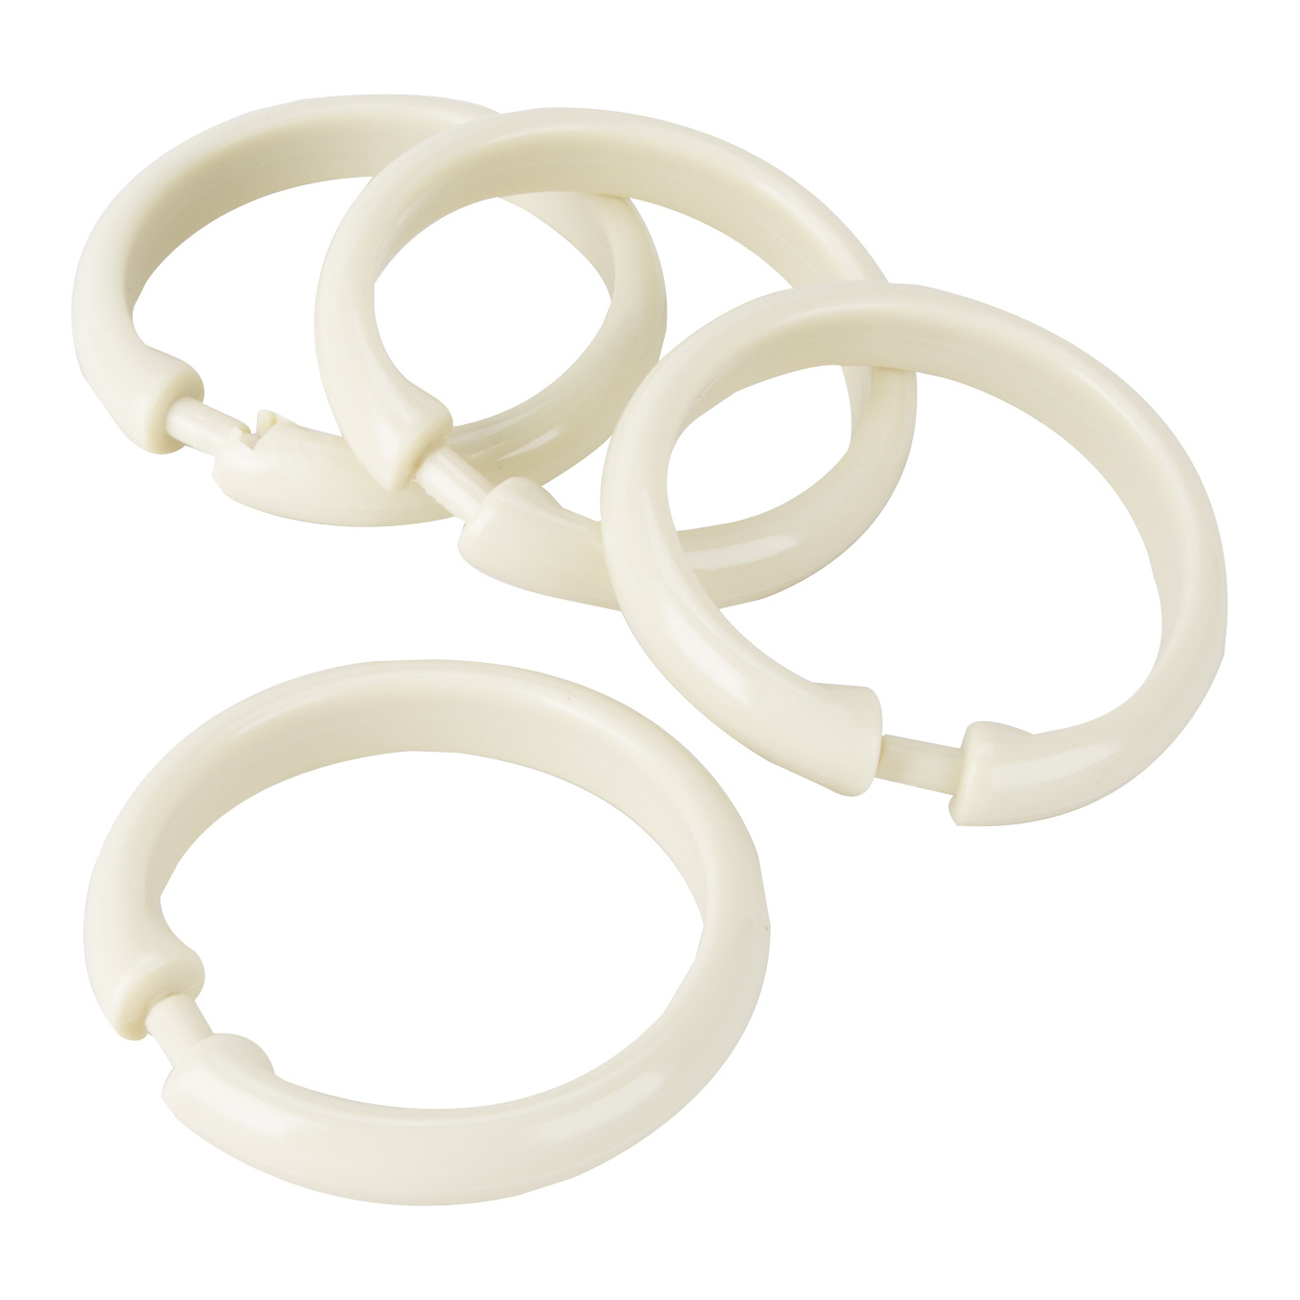 Buy Simple Spaces SD-ORING-B3L Shower Curtain Ring, Plastic, Beige